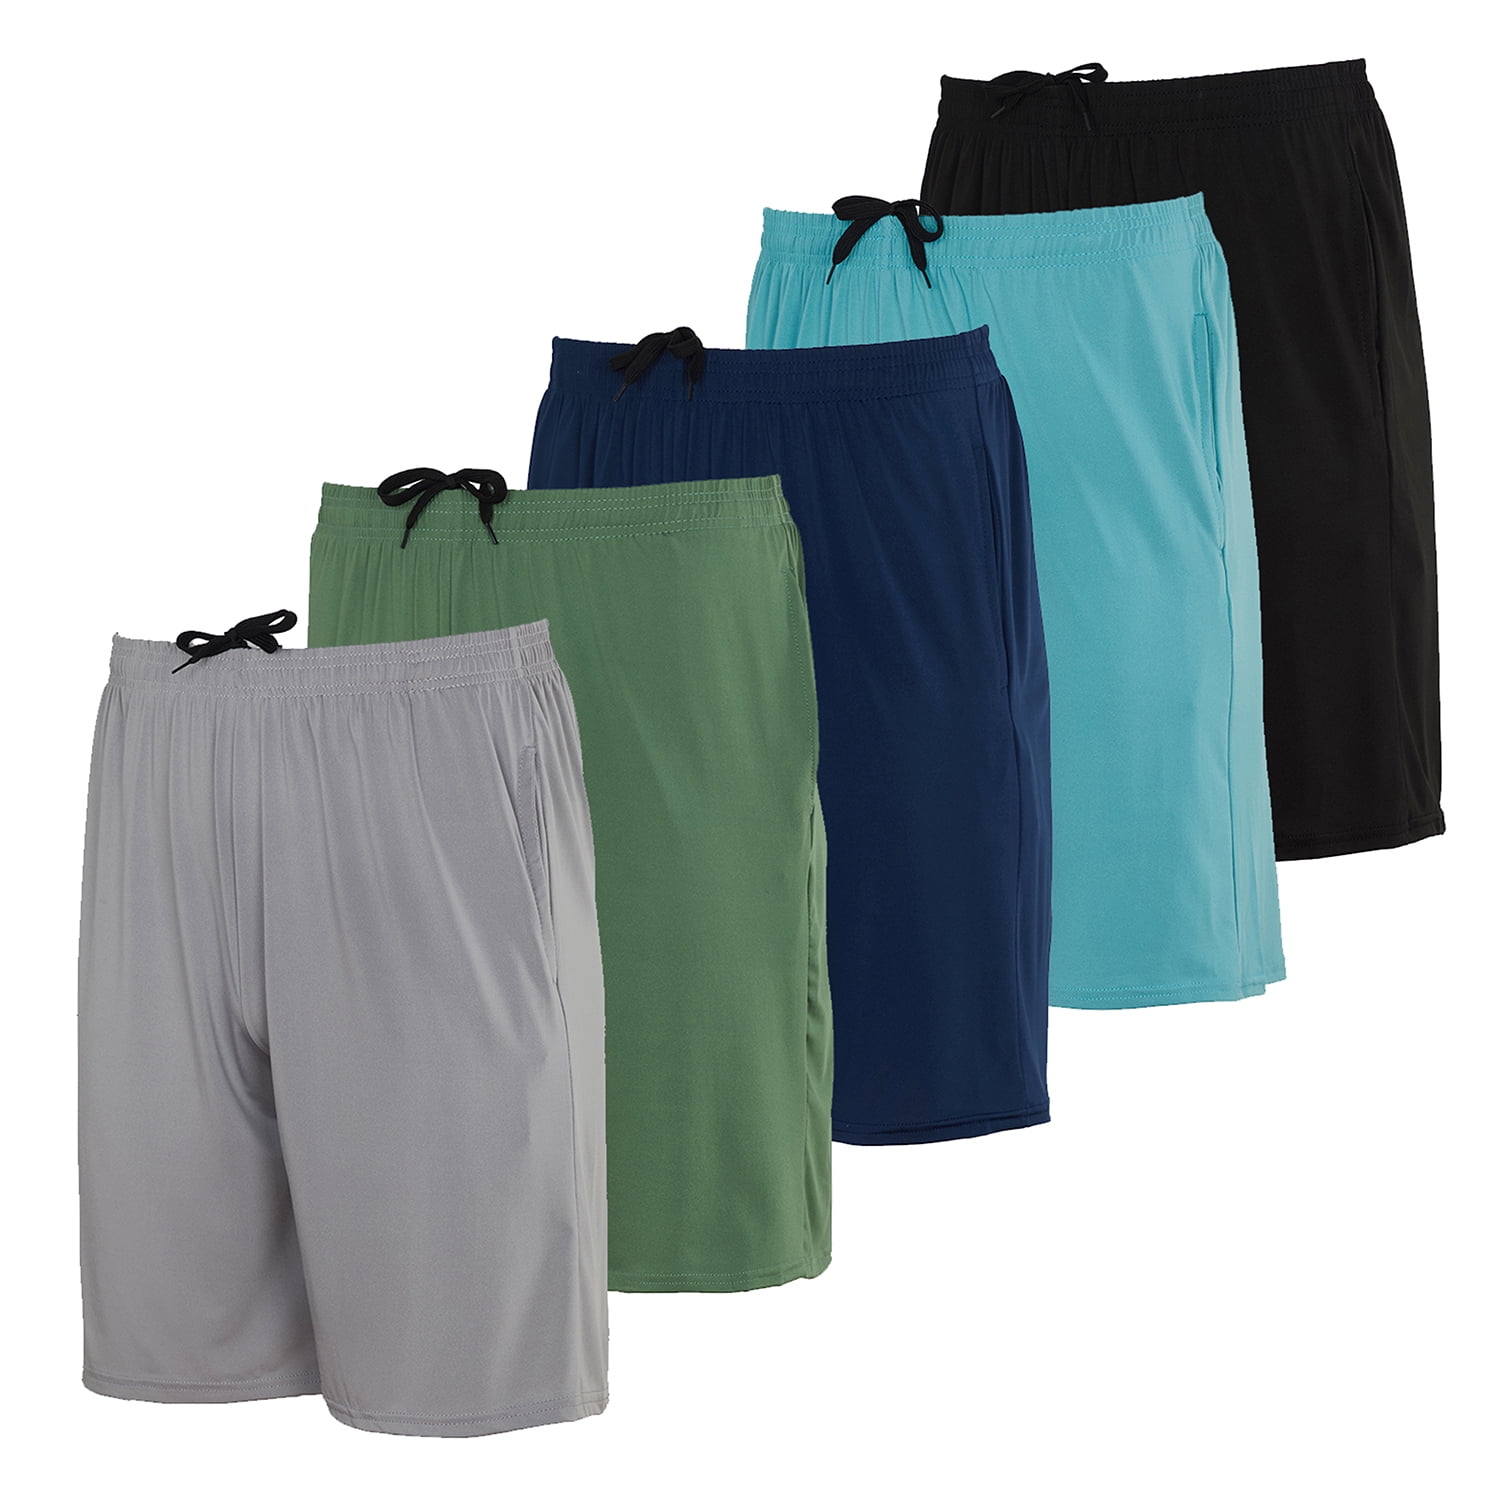 Real Essentials 5 Pack: Men's Dry-Fit Sweat Resistant Active Athletic ...